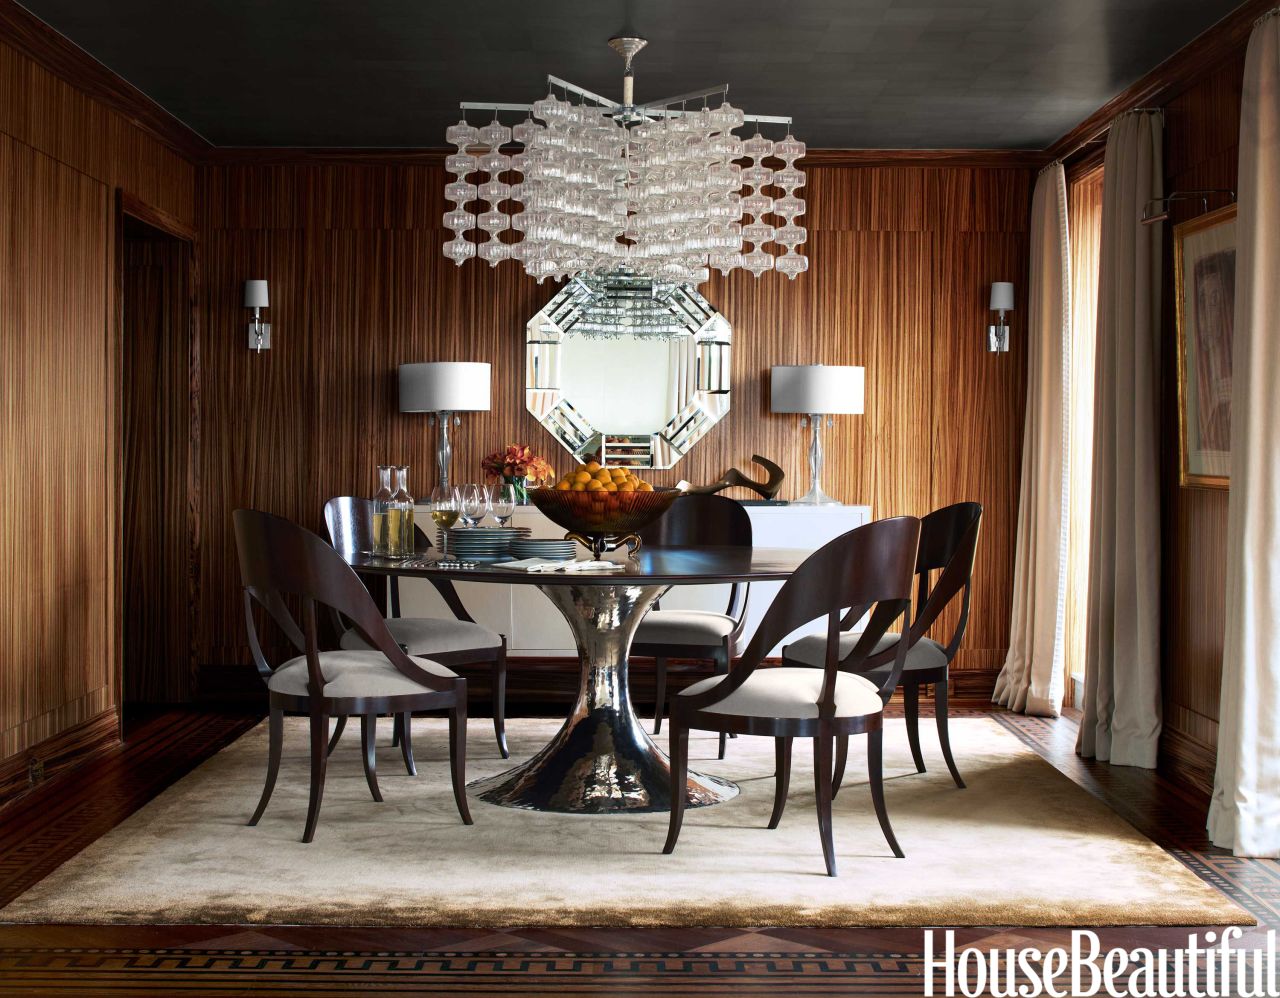 This dining room by Phoebe and Jim Howard, featured in the November 2013 issue of House Beautiful, sets modern-style furniture against moody wood walls.